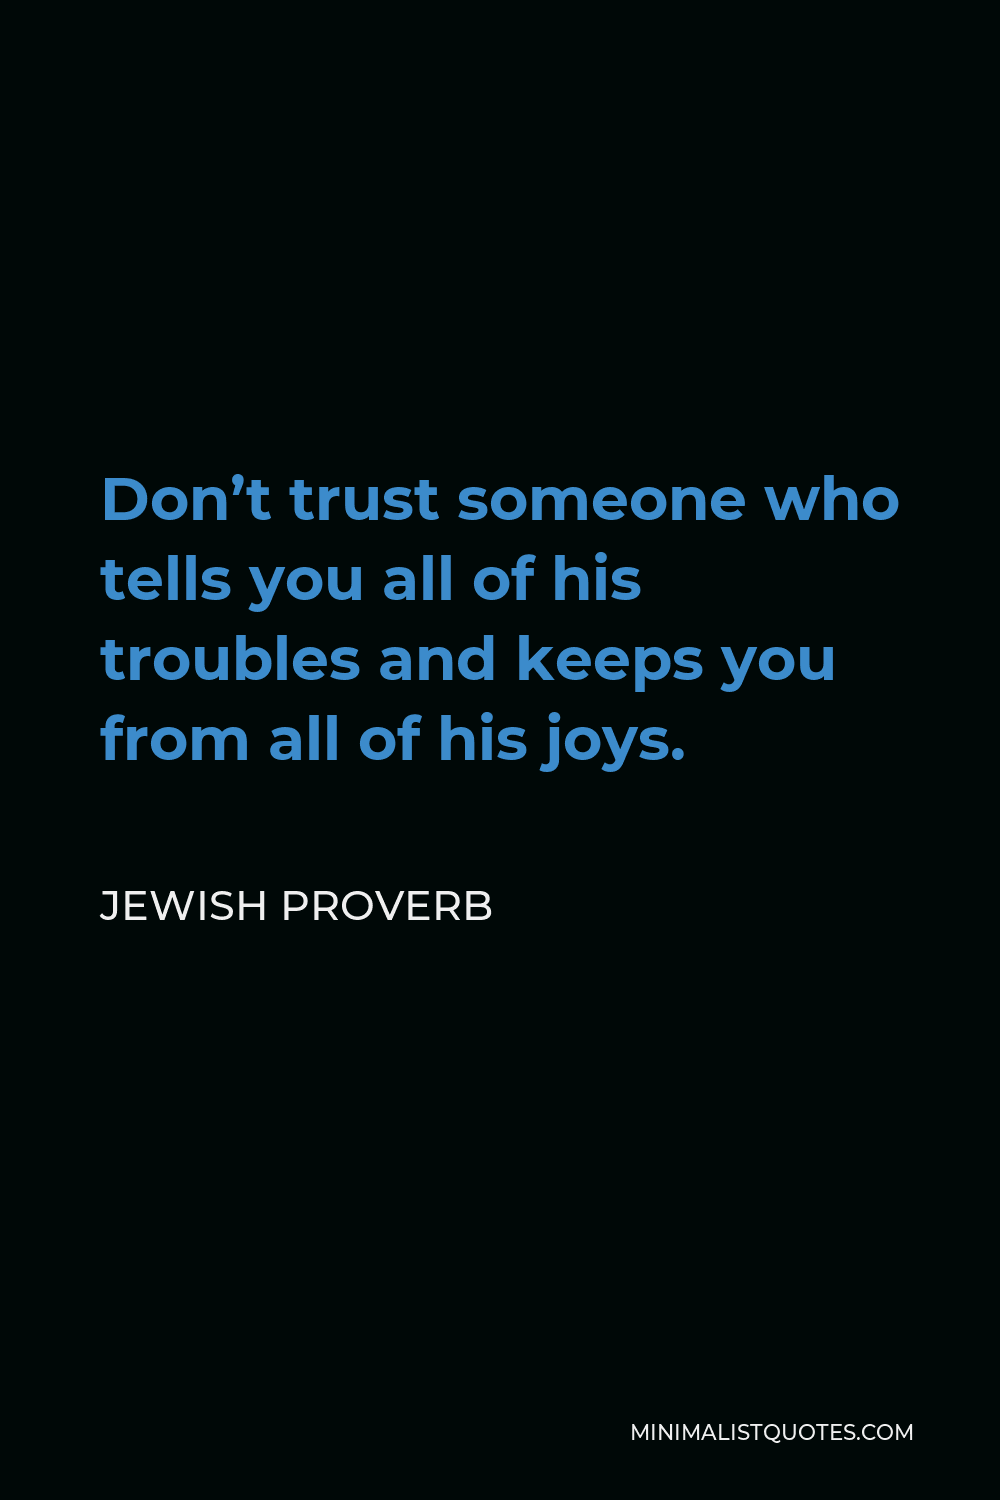 Jewish Proverb Quote - Don’t trust someone who tells you all of his troubles and keeps you from all of his joys.